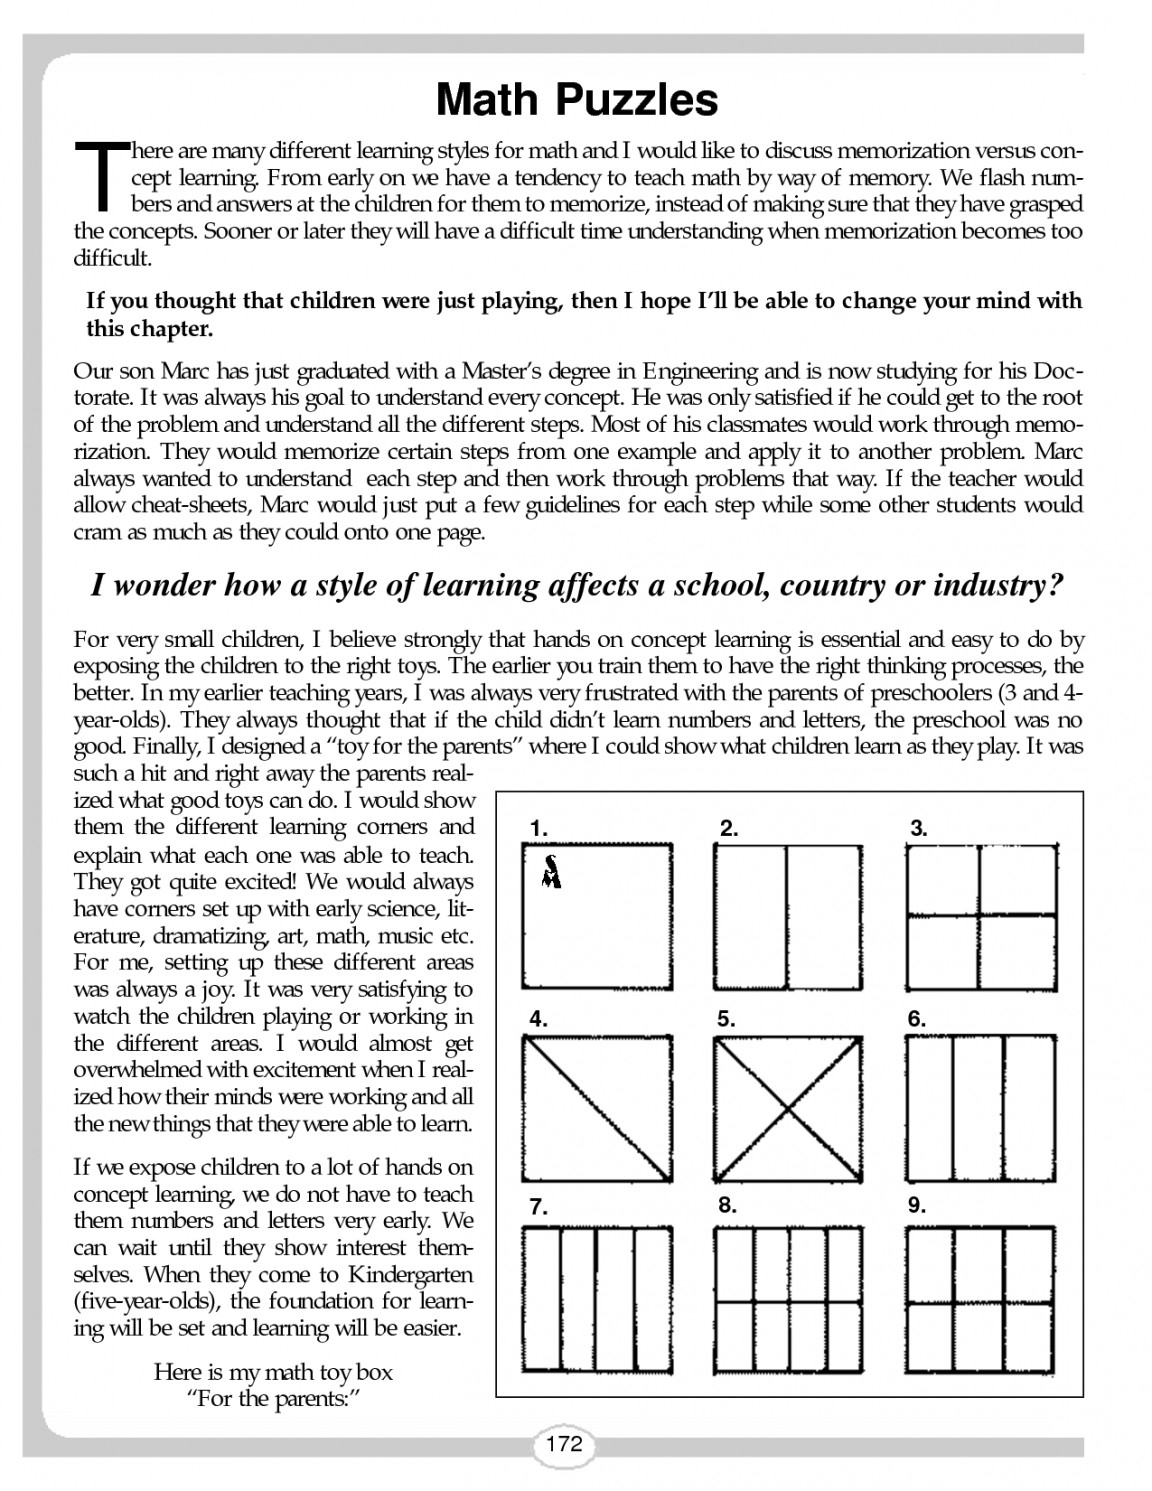 Printable Logic Puzzles For Middle School New Crossword Thanksgiving - Printable Logic Puzzles For Middle School